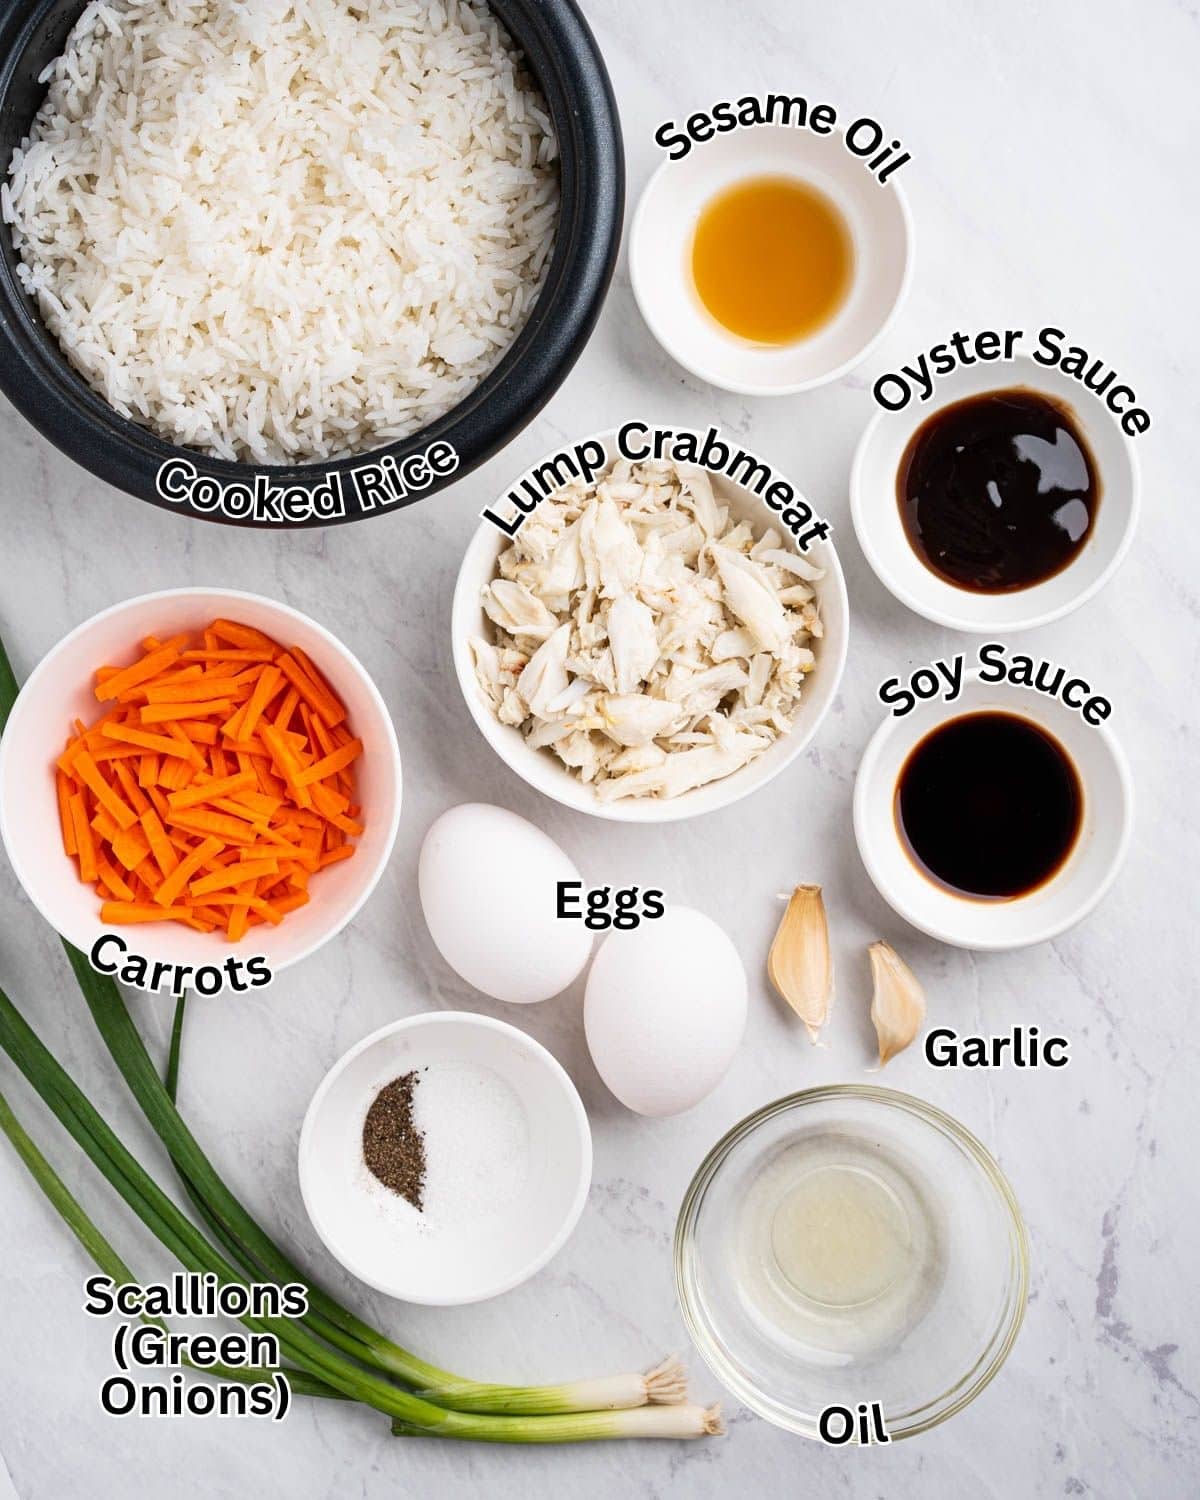 Labeled ingredients for crab fried rice.